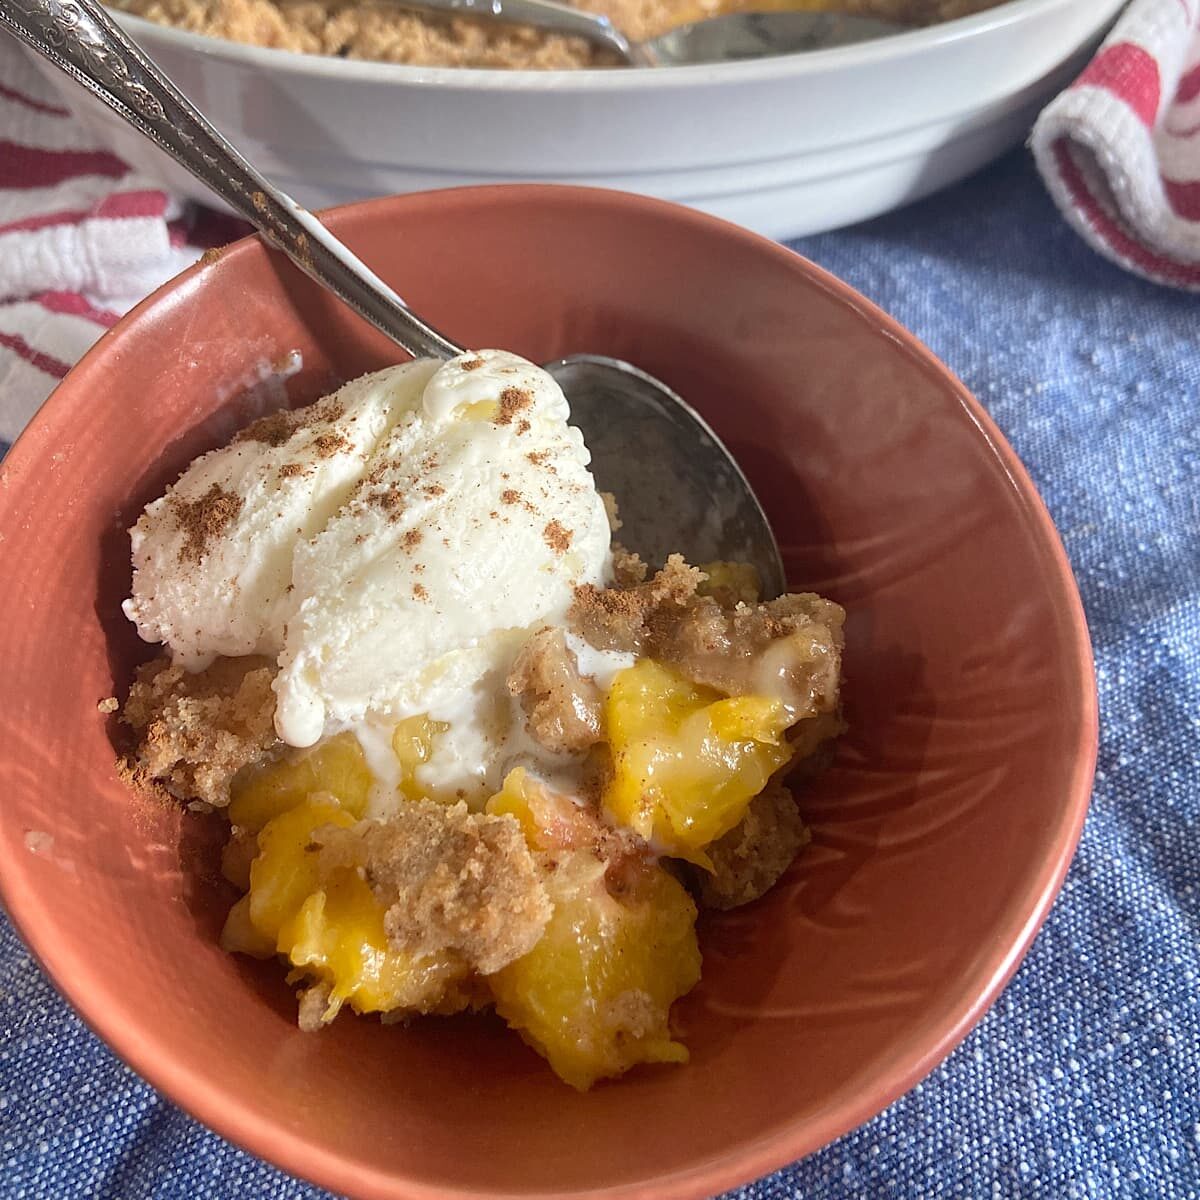 a serving of peach crisp with a scoop of ice-cream and a sprinkle of cinnamon